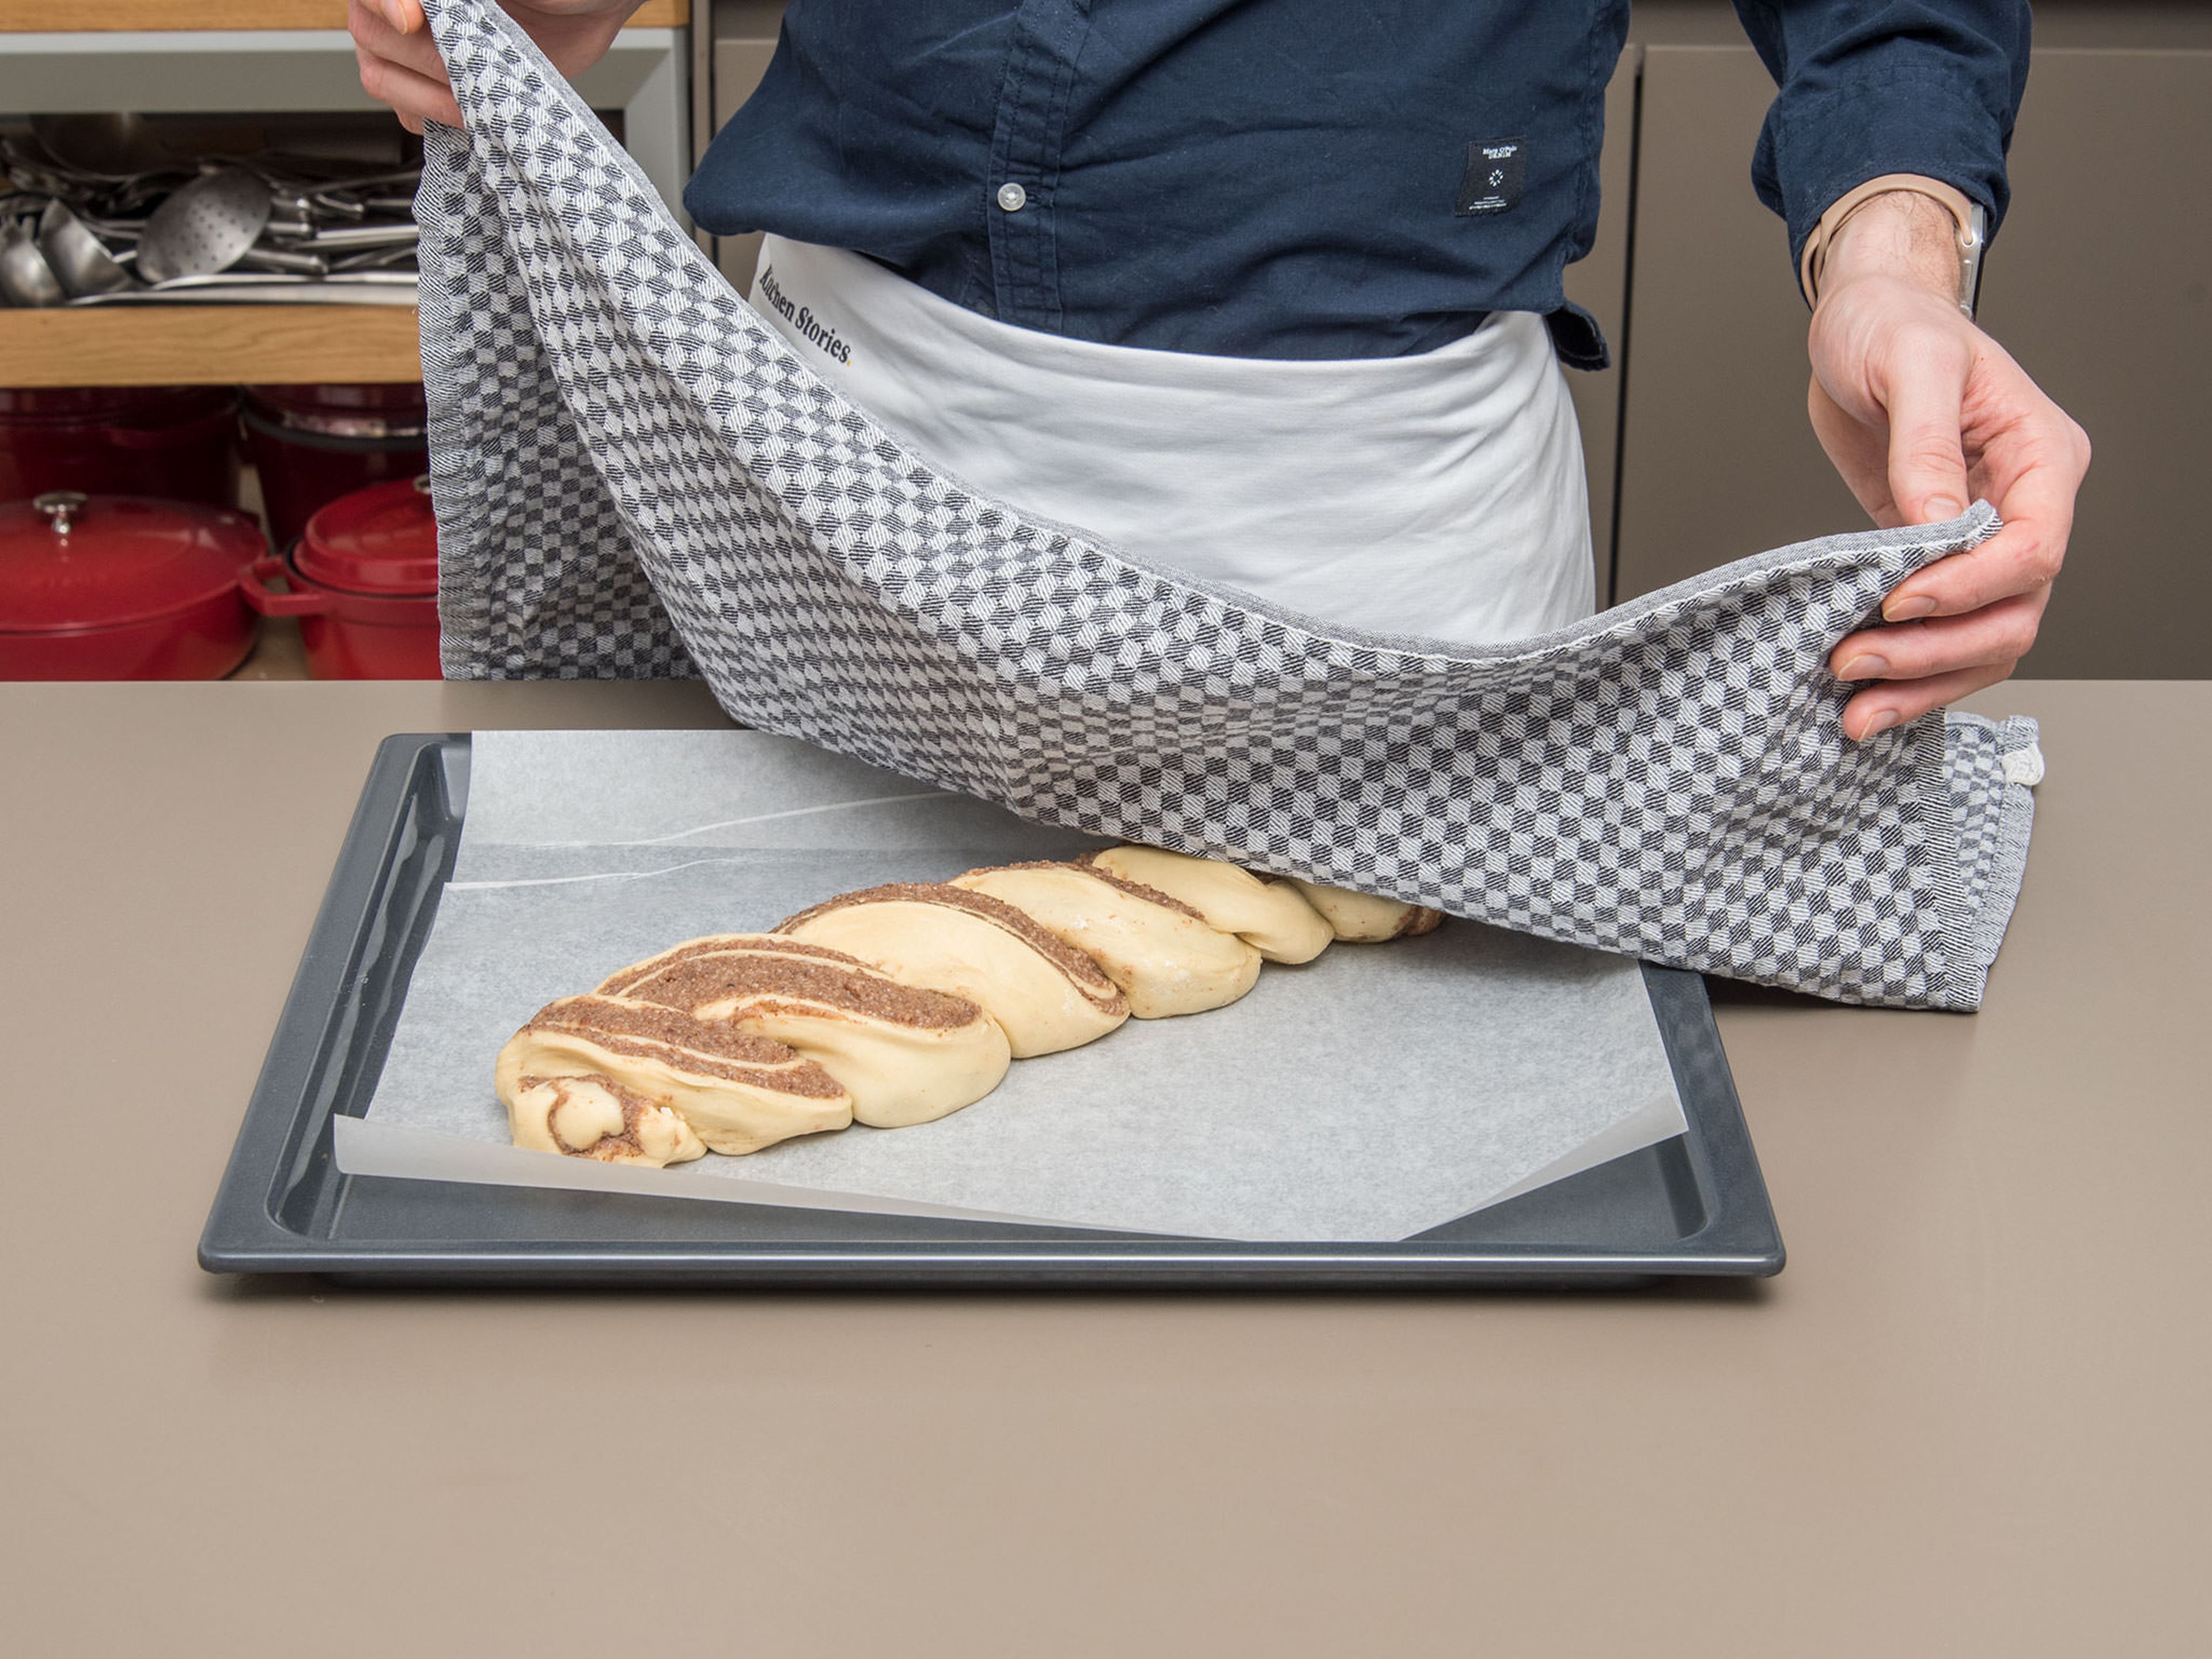 Place the braided bread onto a lined baking sheet. Cover with a kitchen towel and set aside for approx. 30 min.